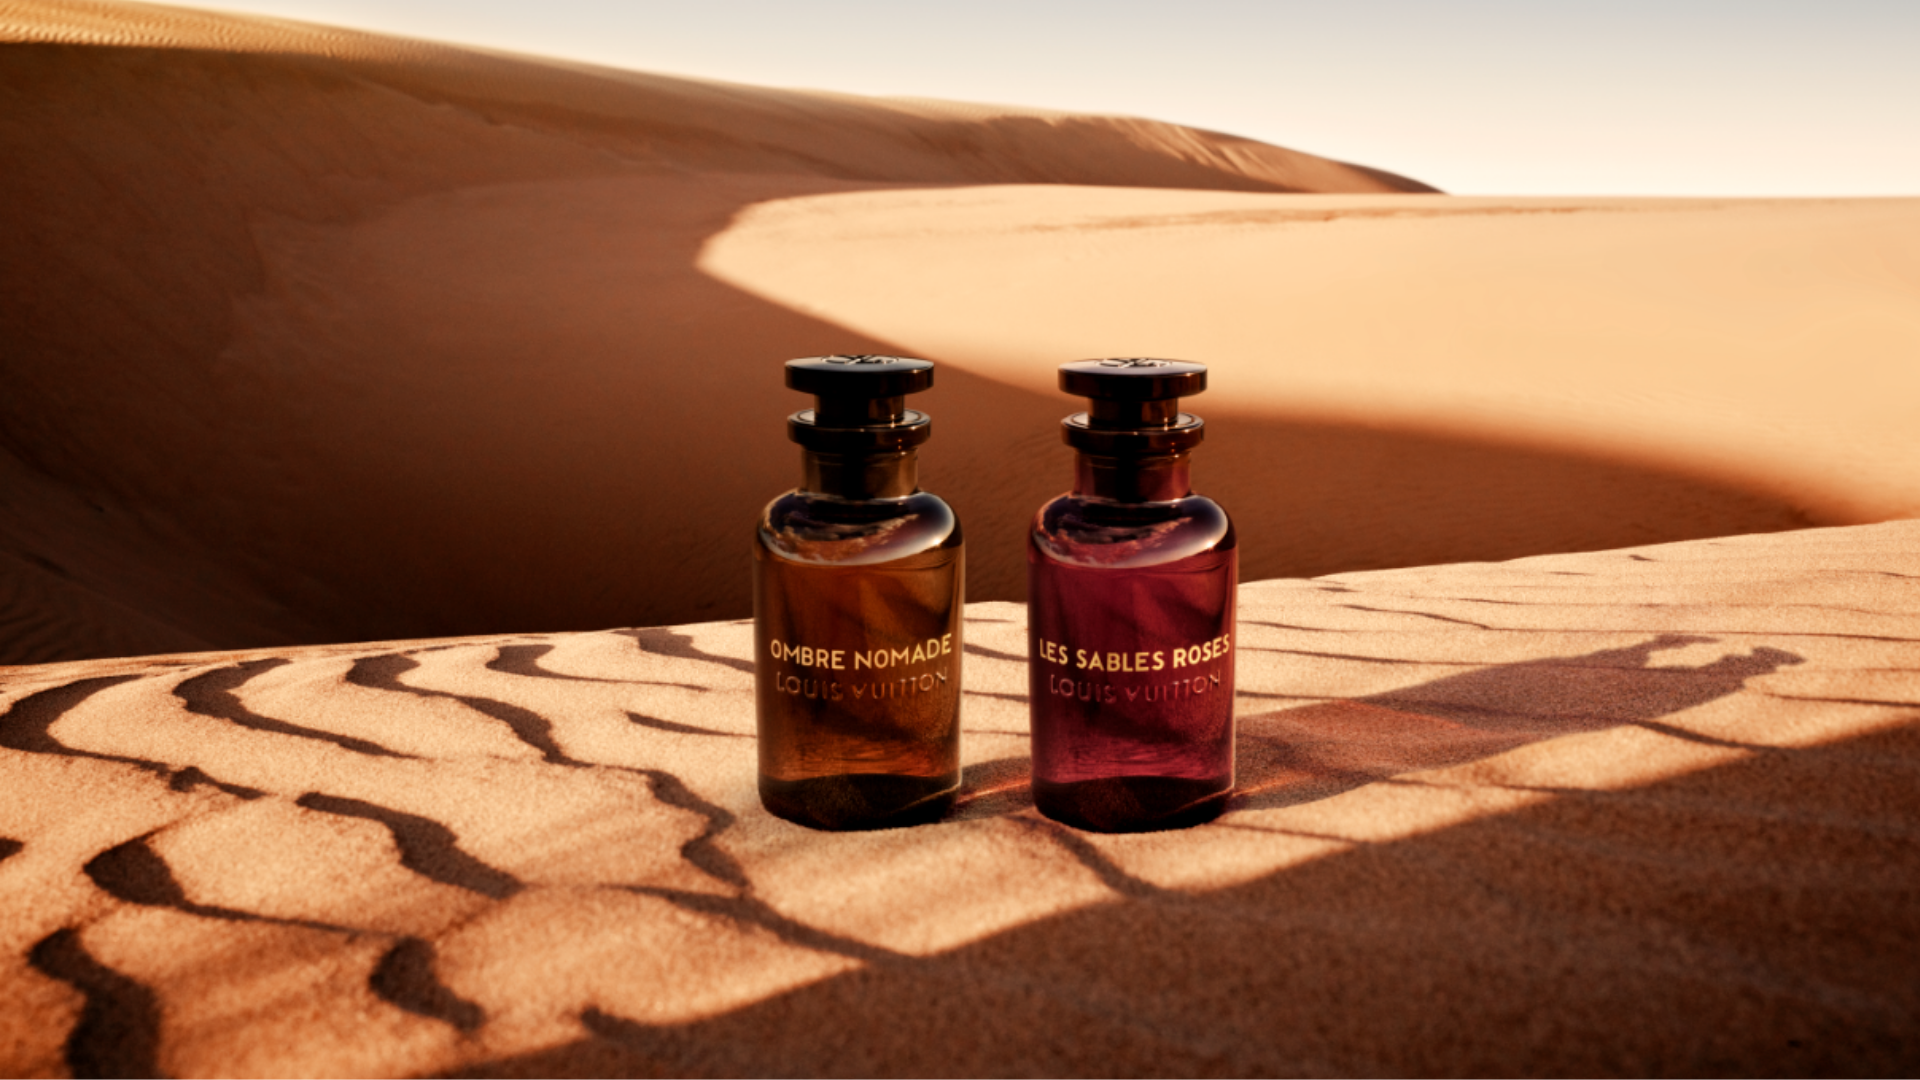 Louis Vuitton's new fragrance, Ombre Nomade, is a journey to the